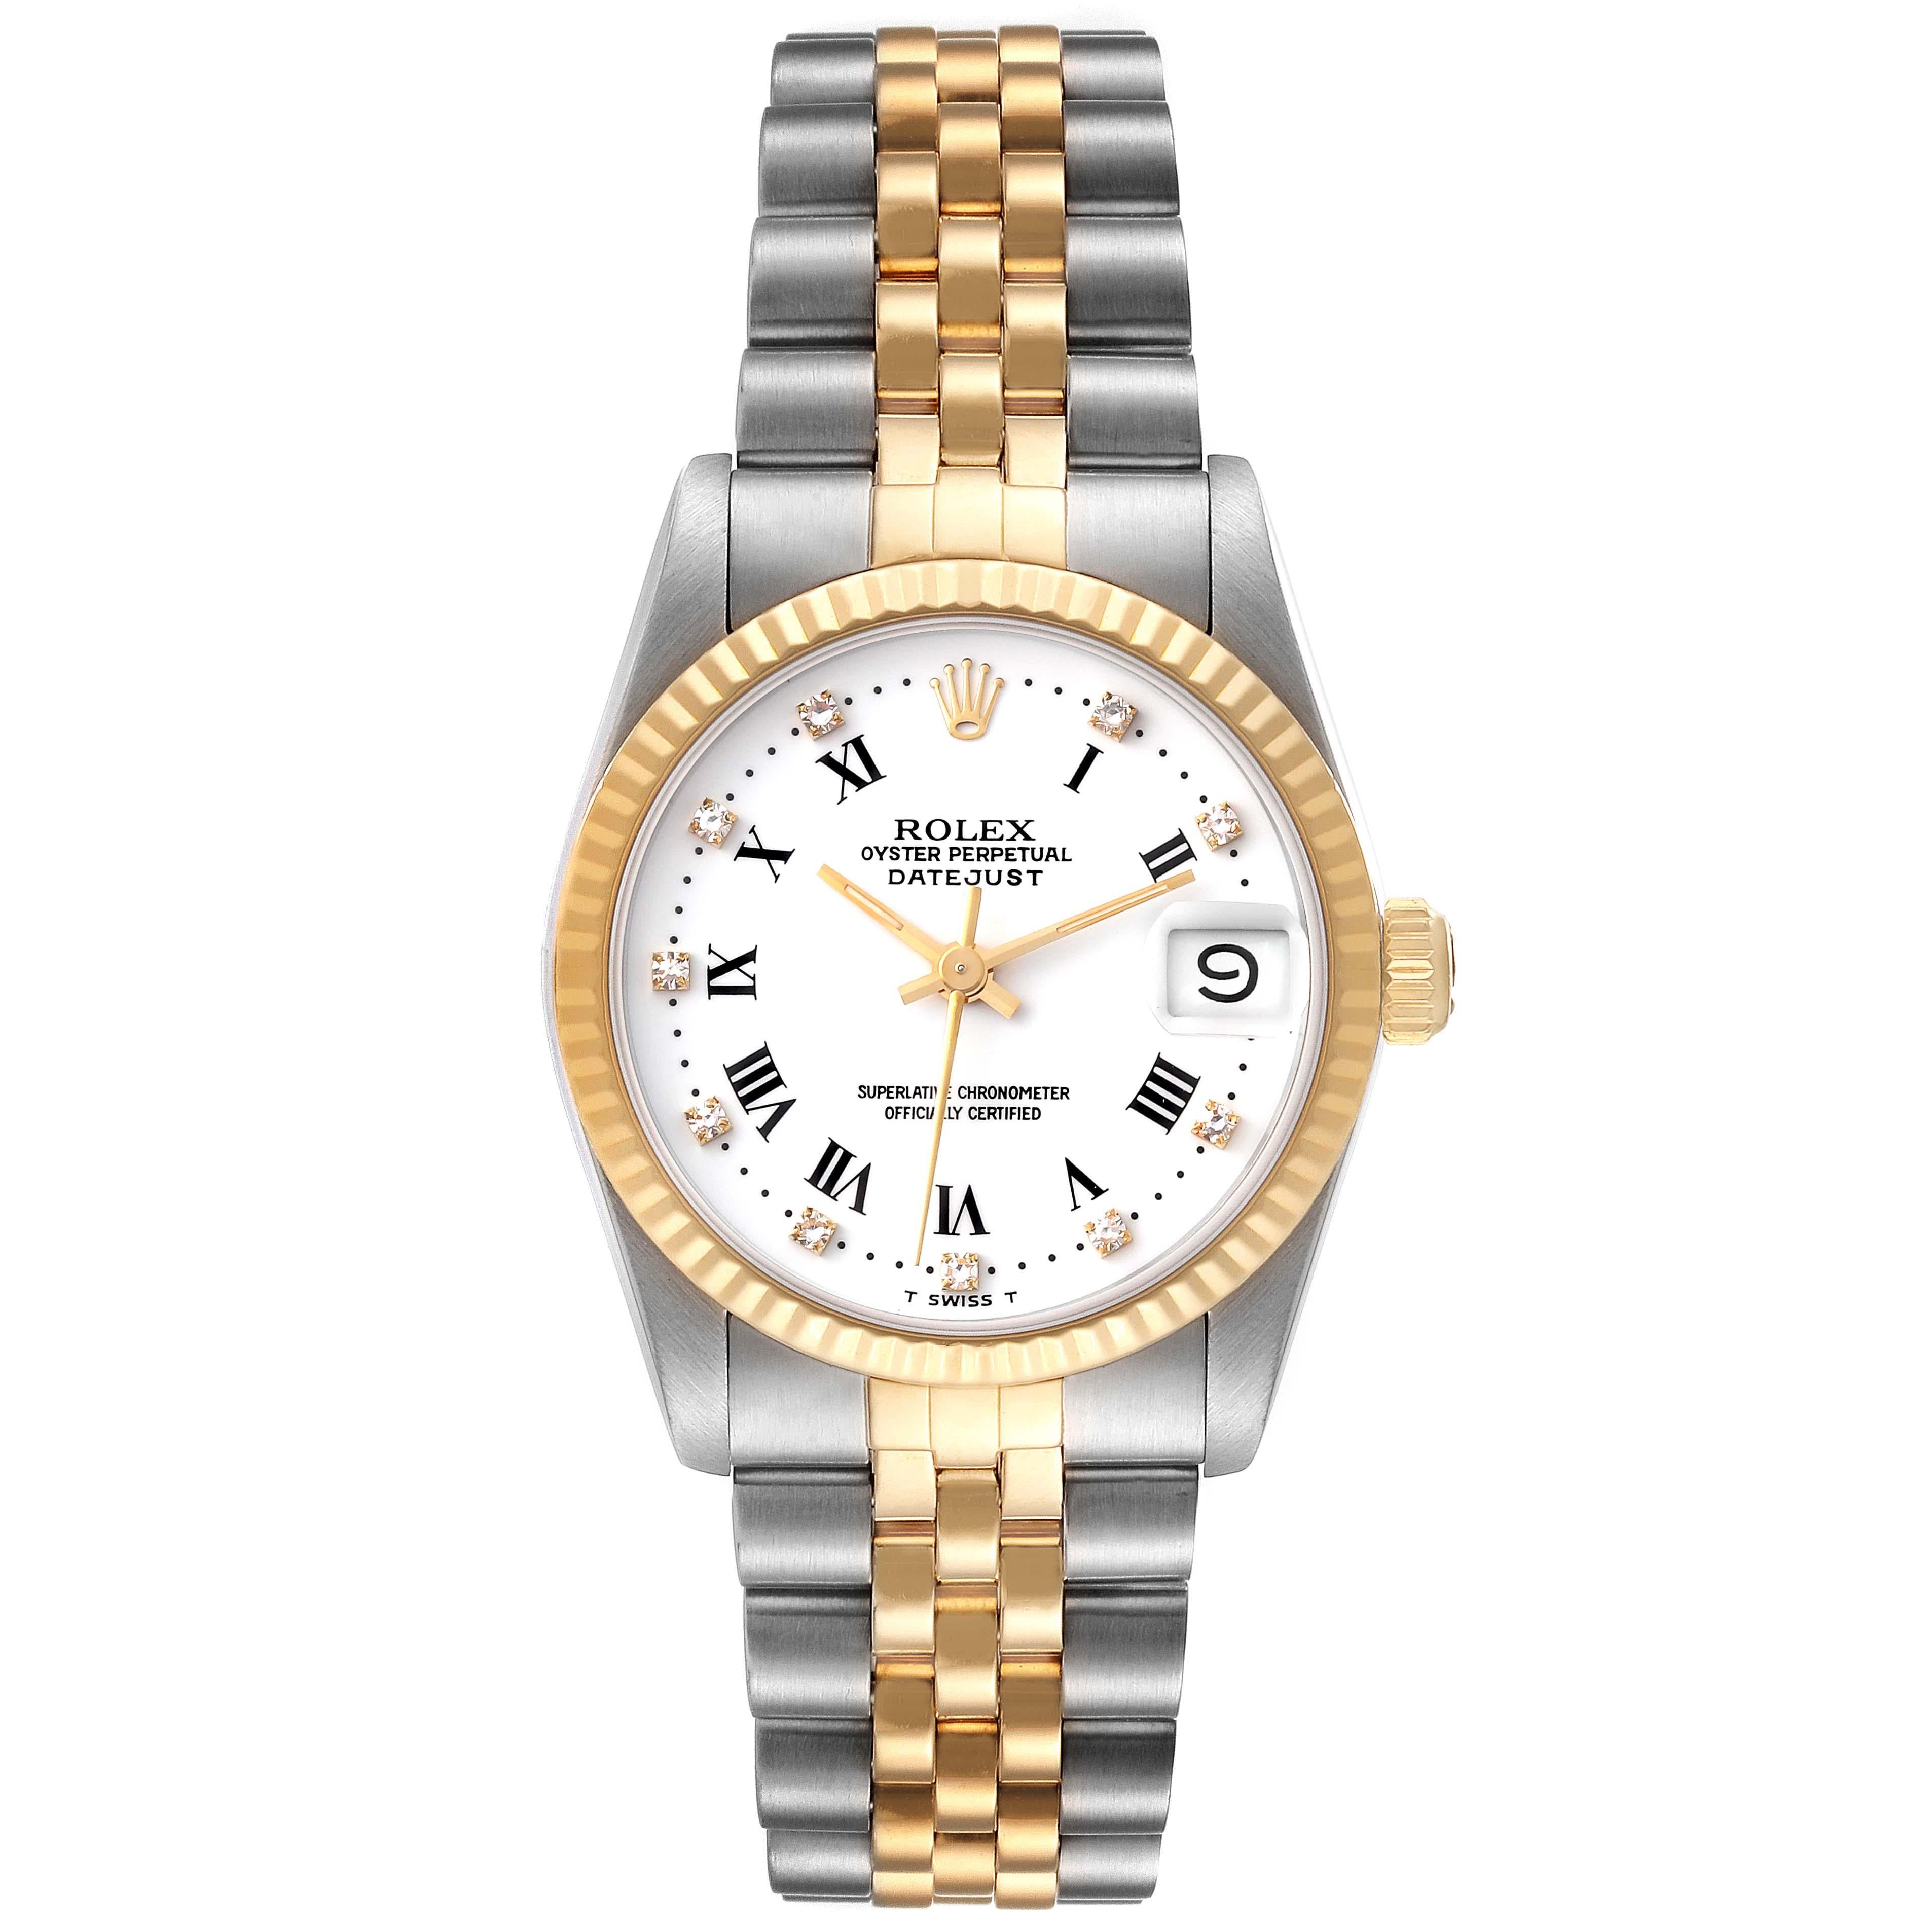 Rolex Datejust Midsize 31mm Steel Yellow Gold White Dial Ladies Watch 68273. Officially certified chronometer automatic self-winding movement. Stainless steel oyster case 31 mm in diameter. Rolex logo on an 18K yellow gold crown. 18k yellow gold